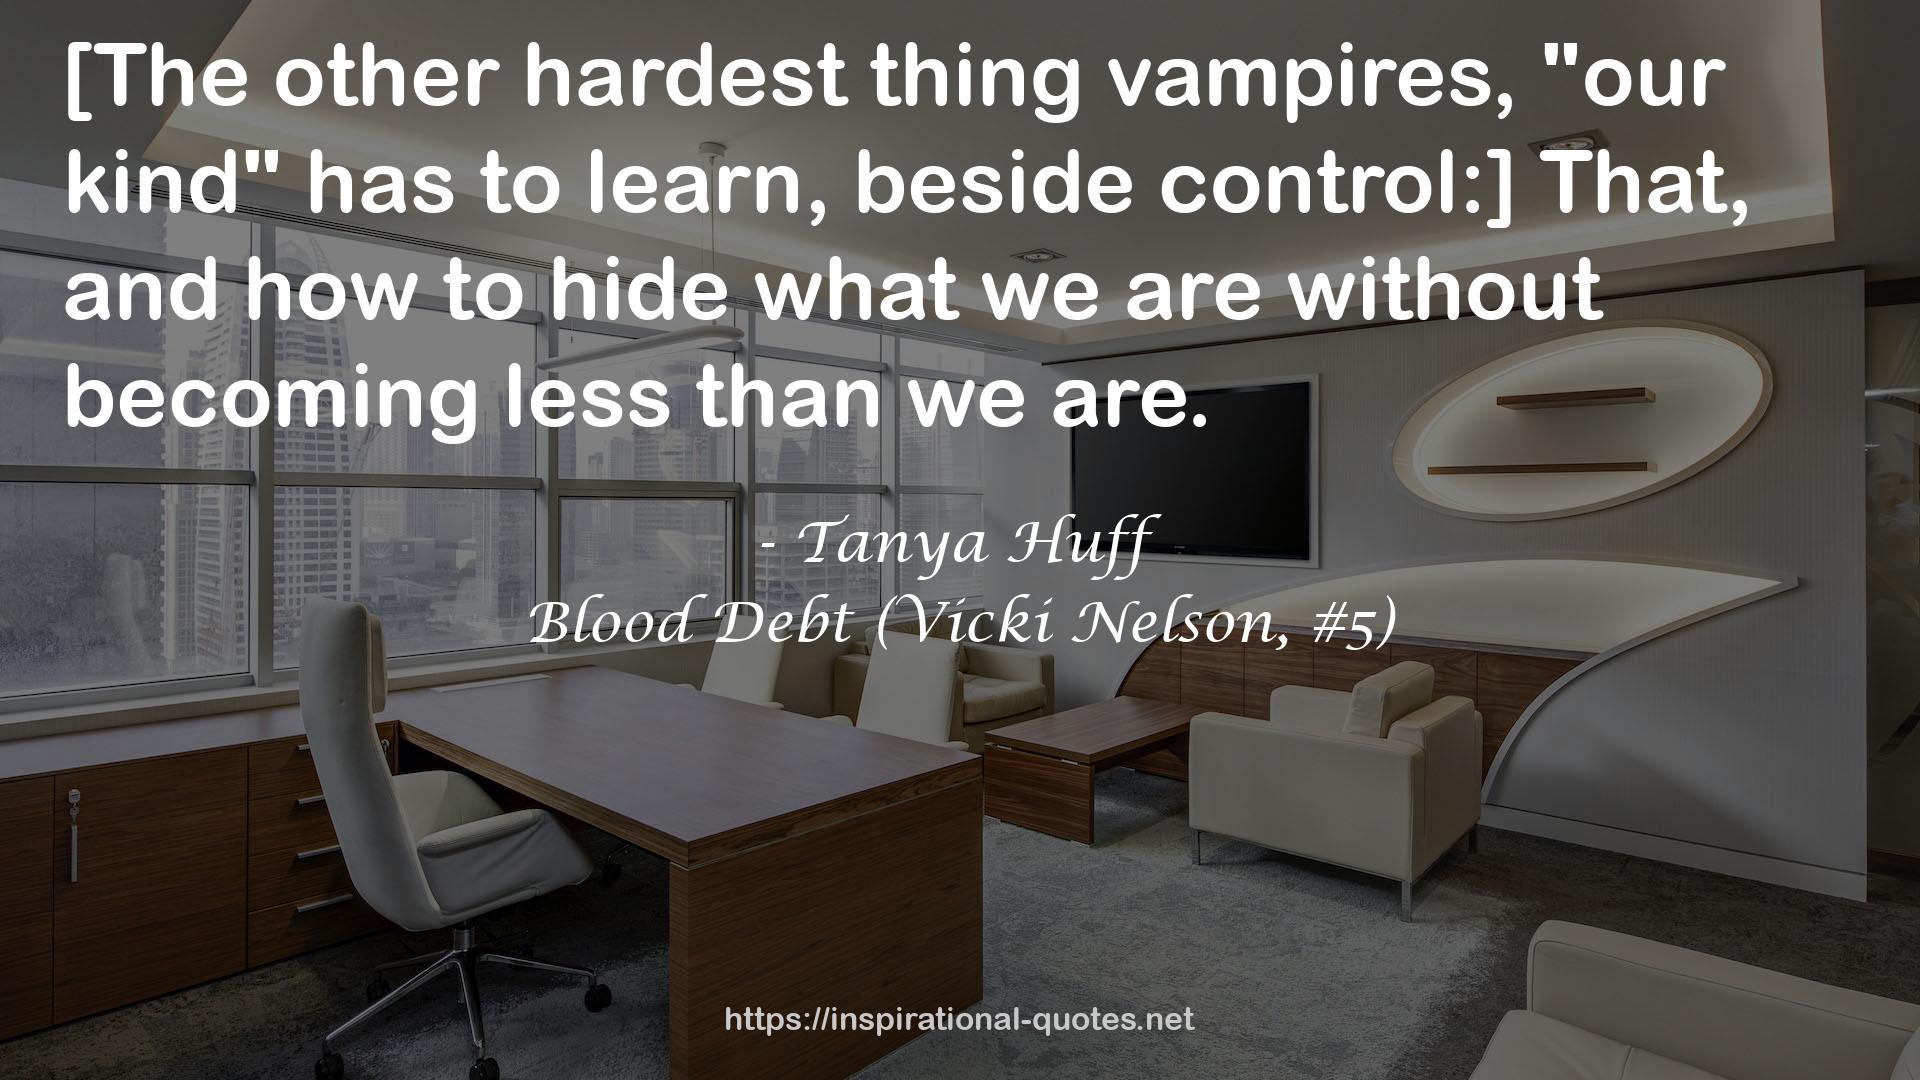 Blood Debt (Vicki Nelson, #5) QUOTES